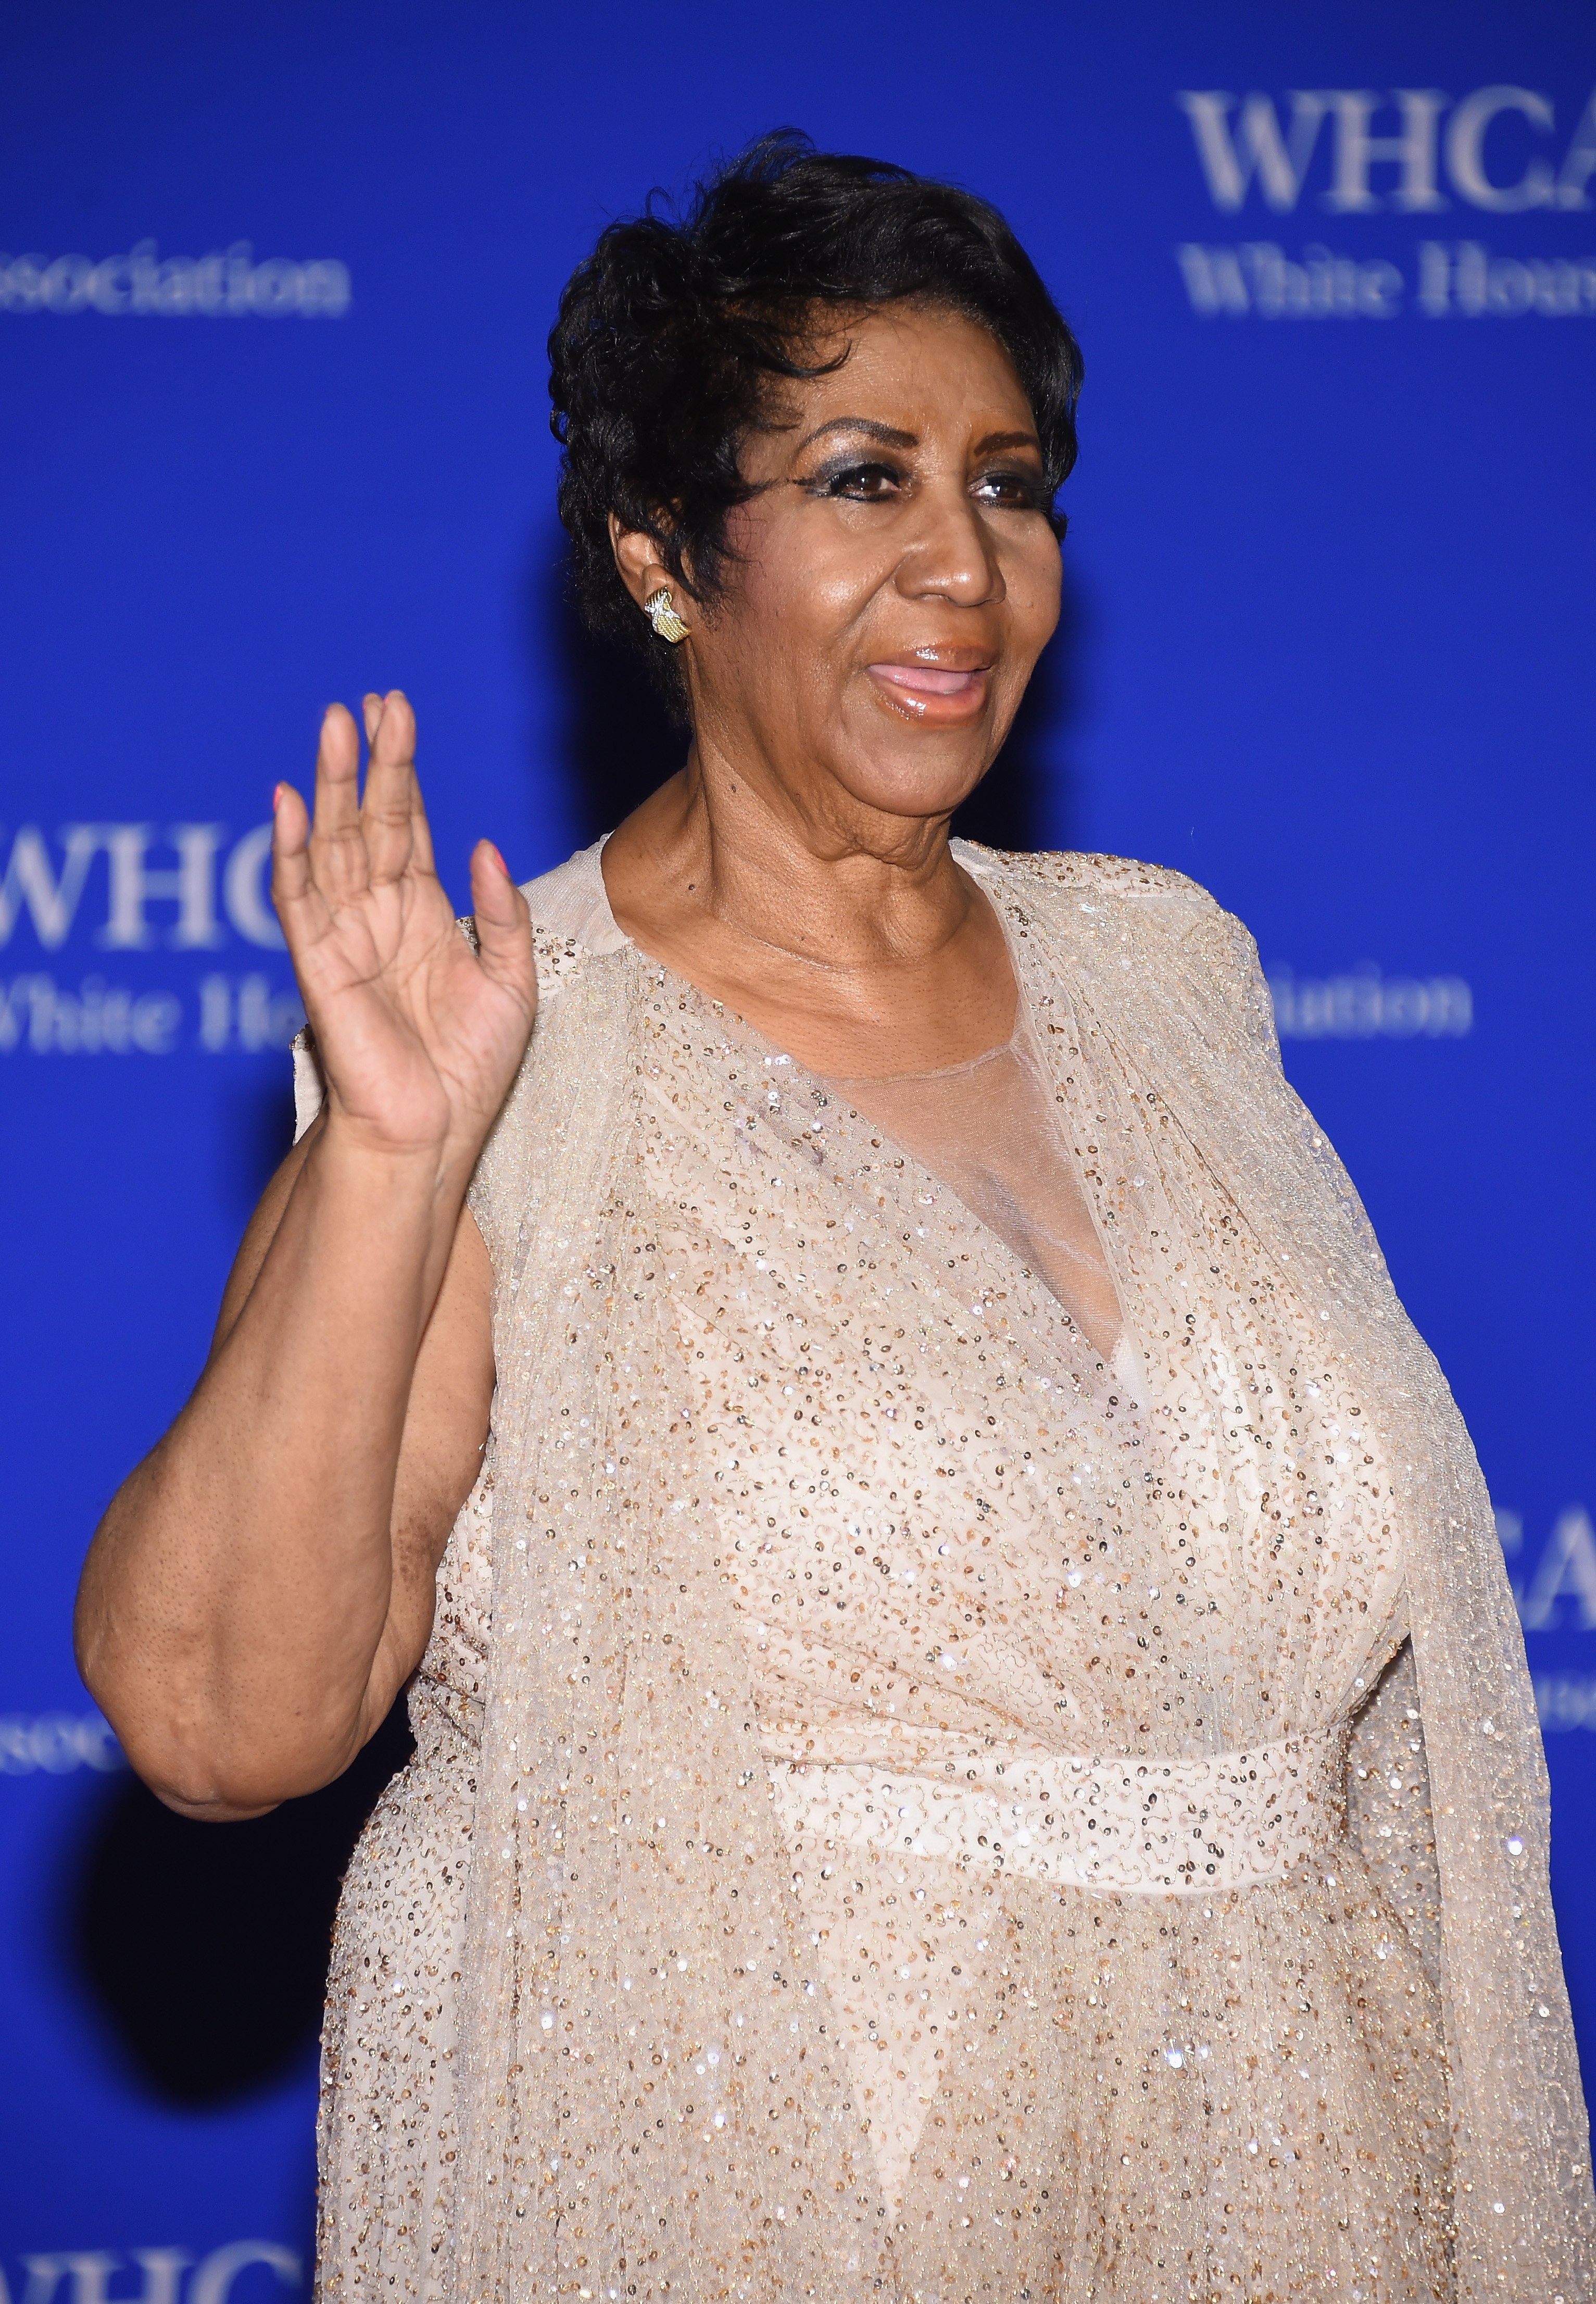 Aretha Franklin attends the 102nd White House Correspondents' Association Dinner on April 30, 2016 in Washington, DC. | Source: Getty Images